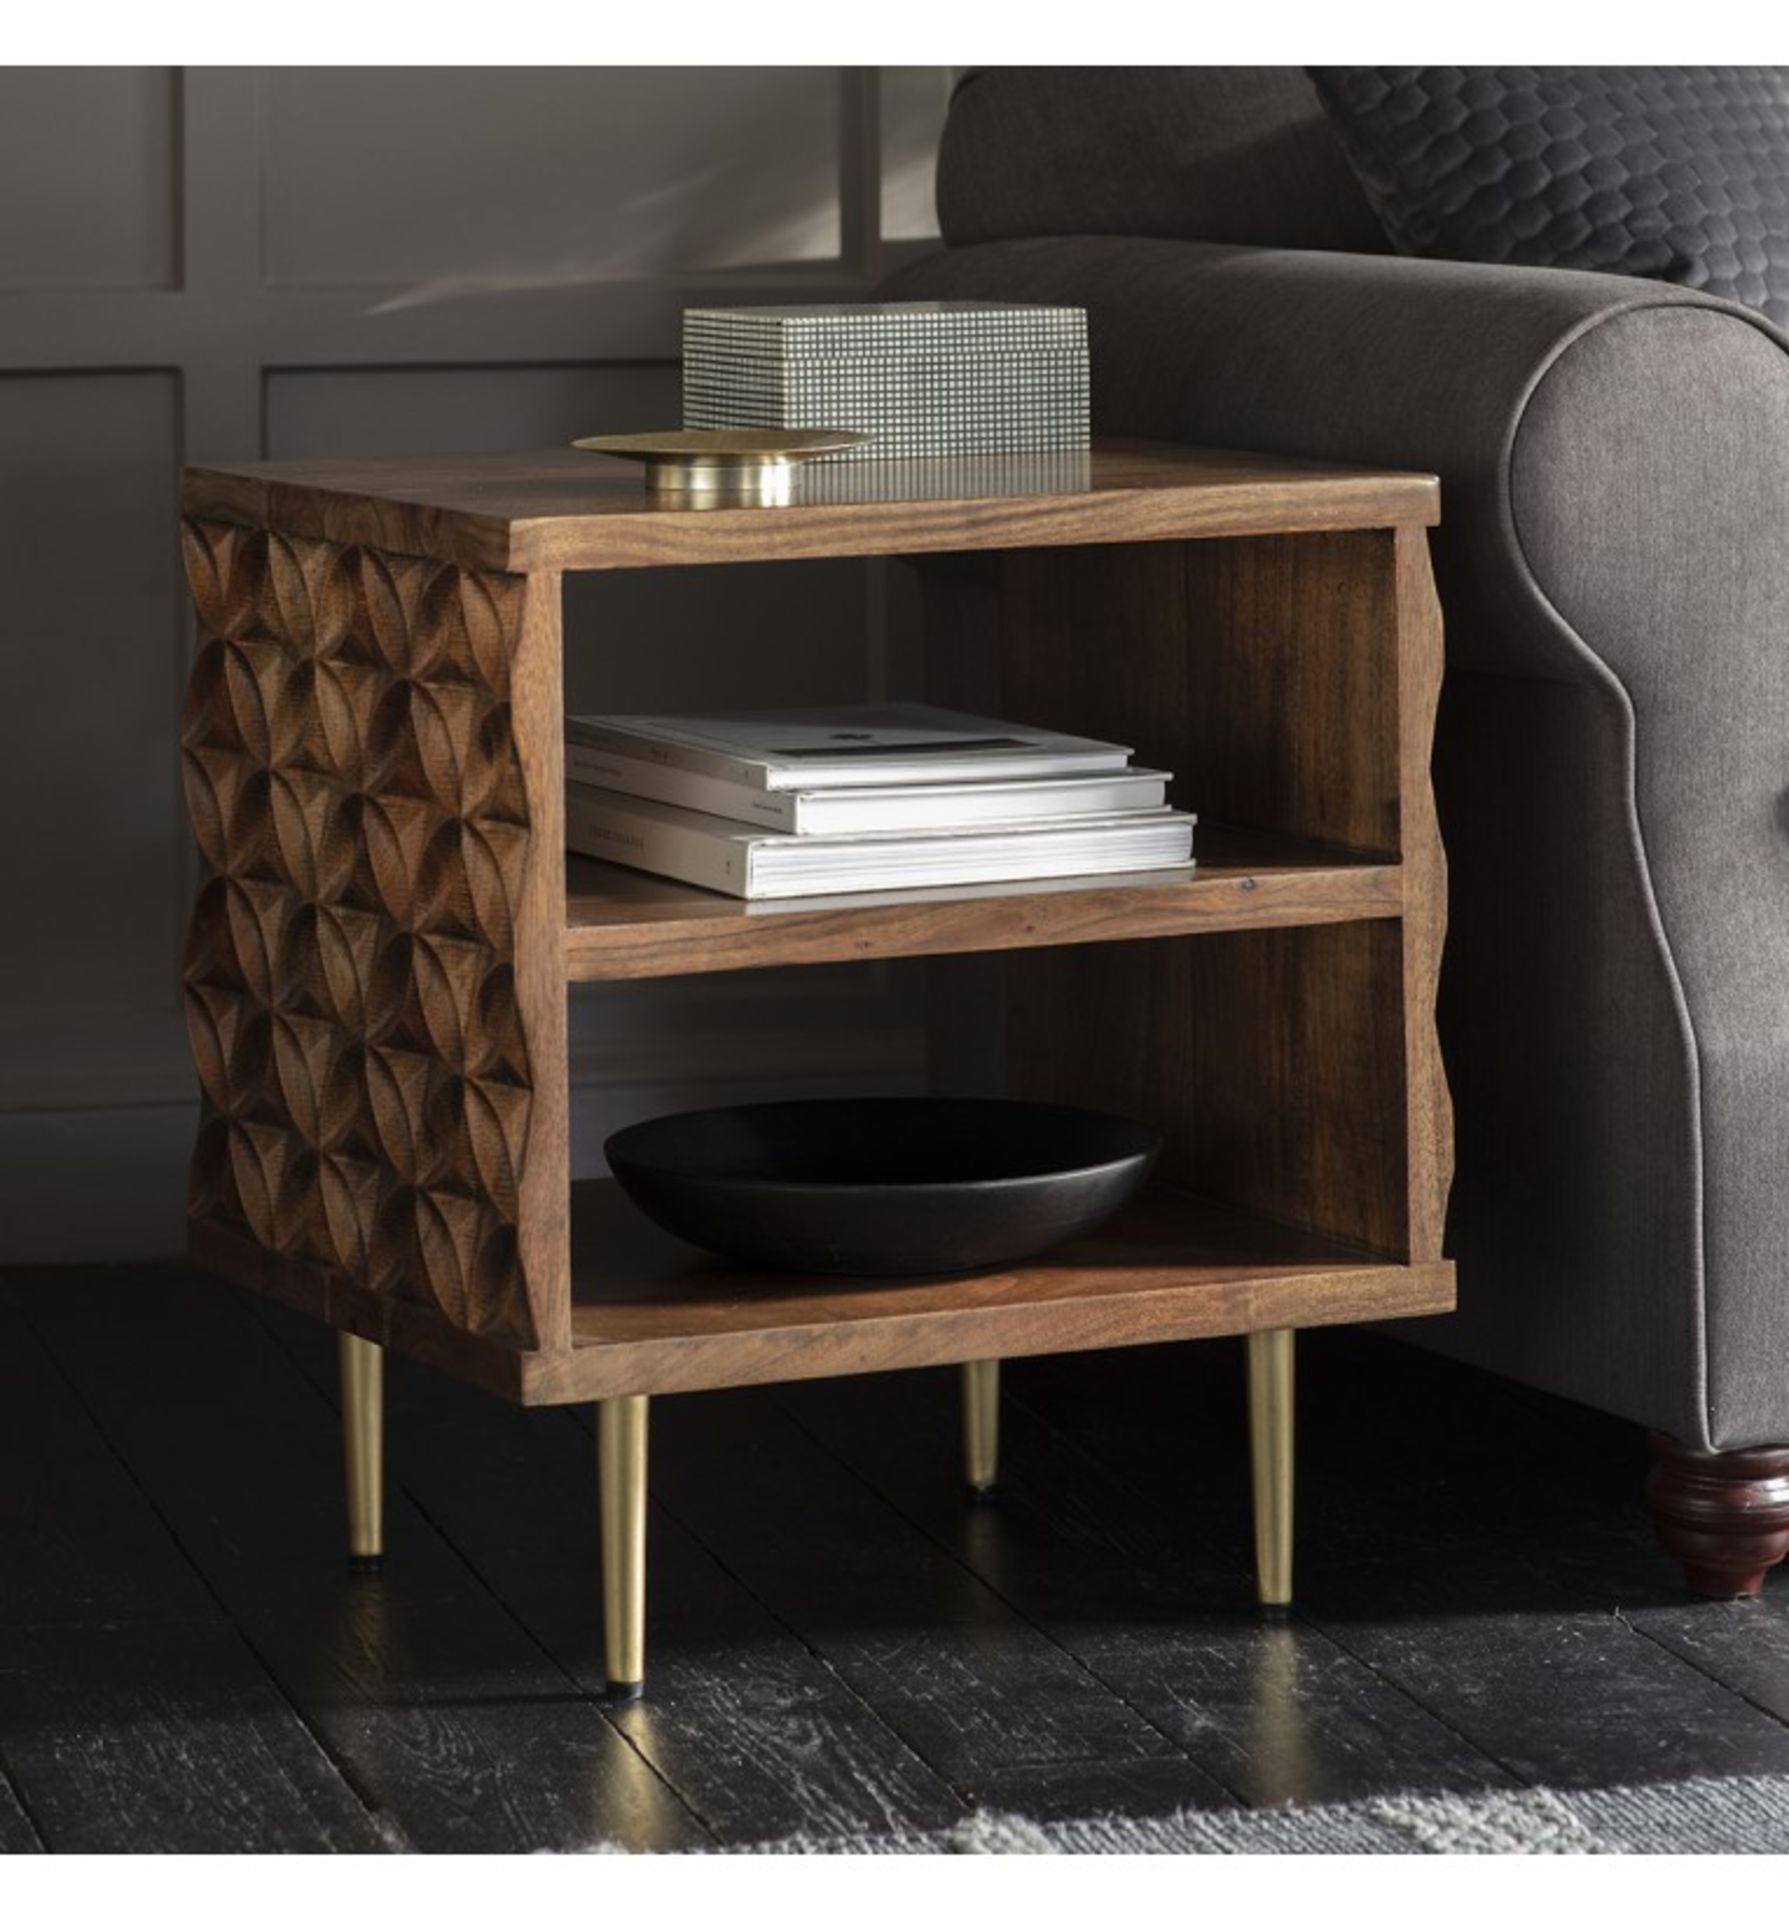 Kerala Side Table The Kerala Side Table Is A Stylish Yet Functional Piece Of Furniture - The Open